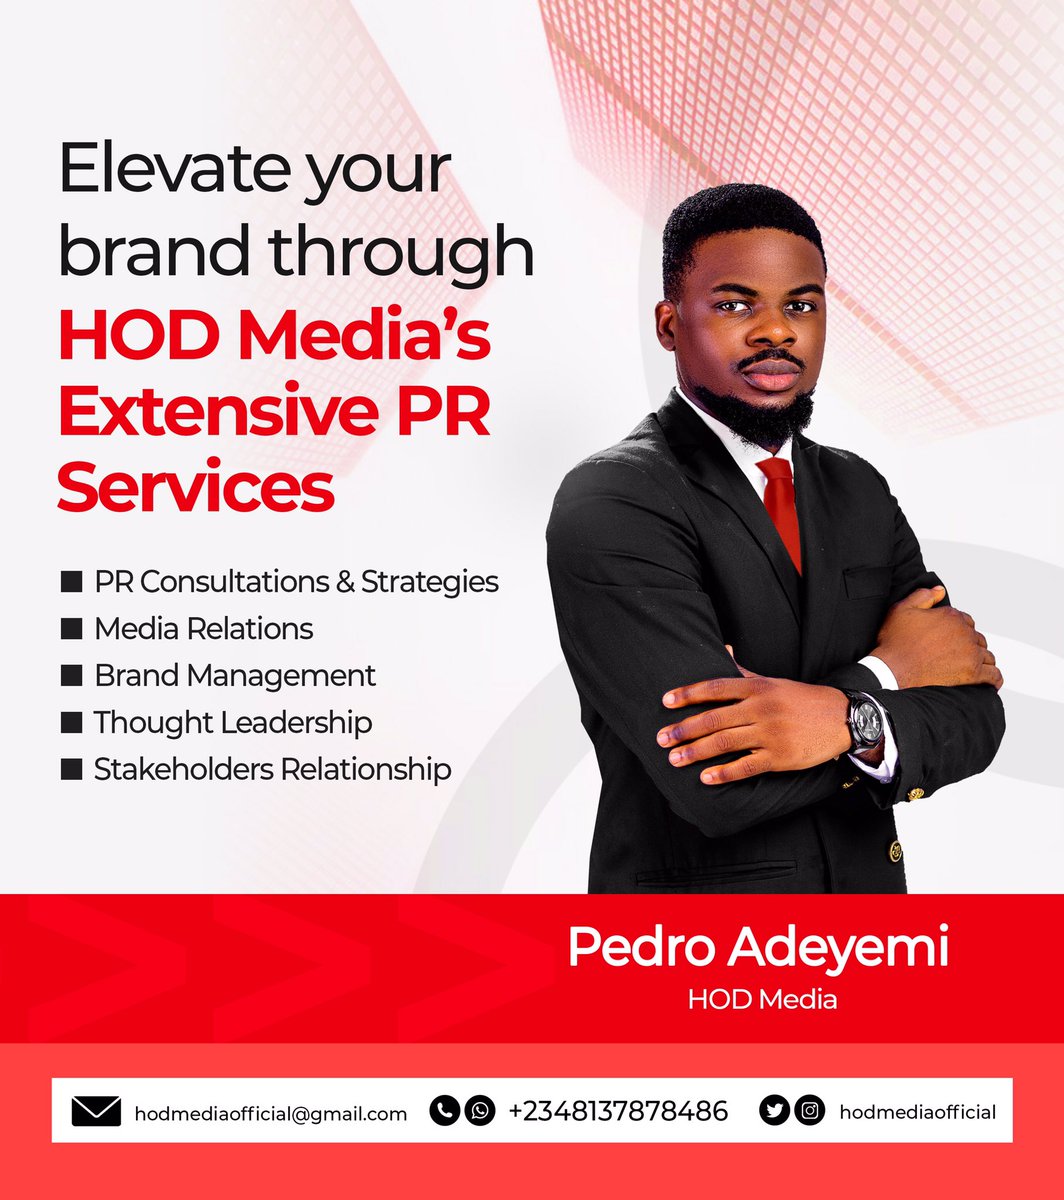 Take your brand to the next level with our PR consultation and strategy services. Let us help you unlock the full potential of your brand and take your business to the next level.

#pedroadeyemi #hodmediaofficial #branding #hoddesignz #branding #mediaconsultant #brandconsultant